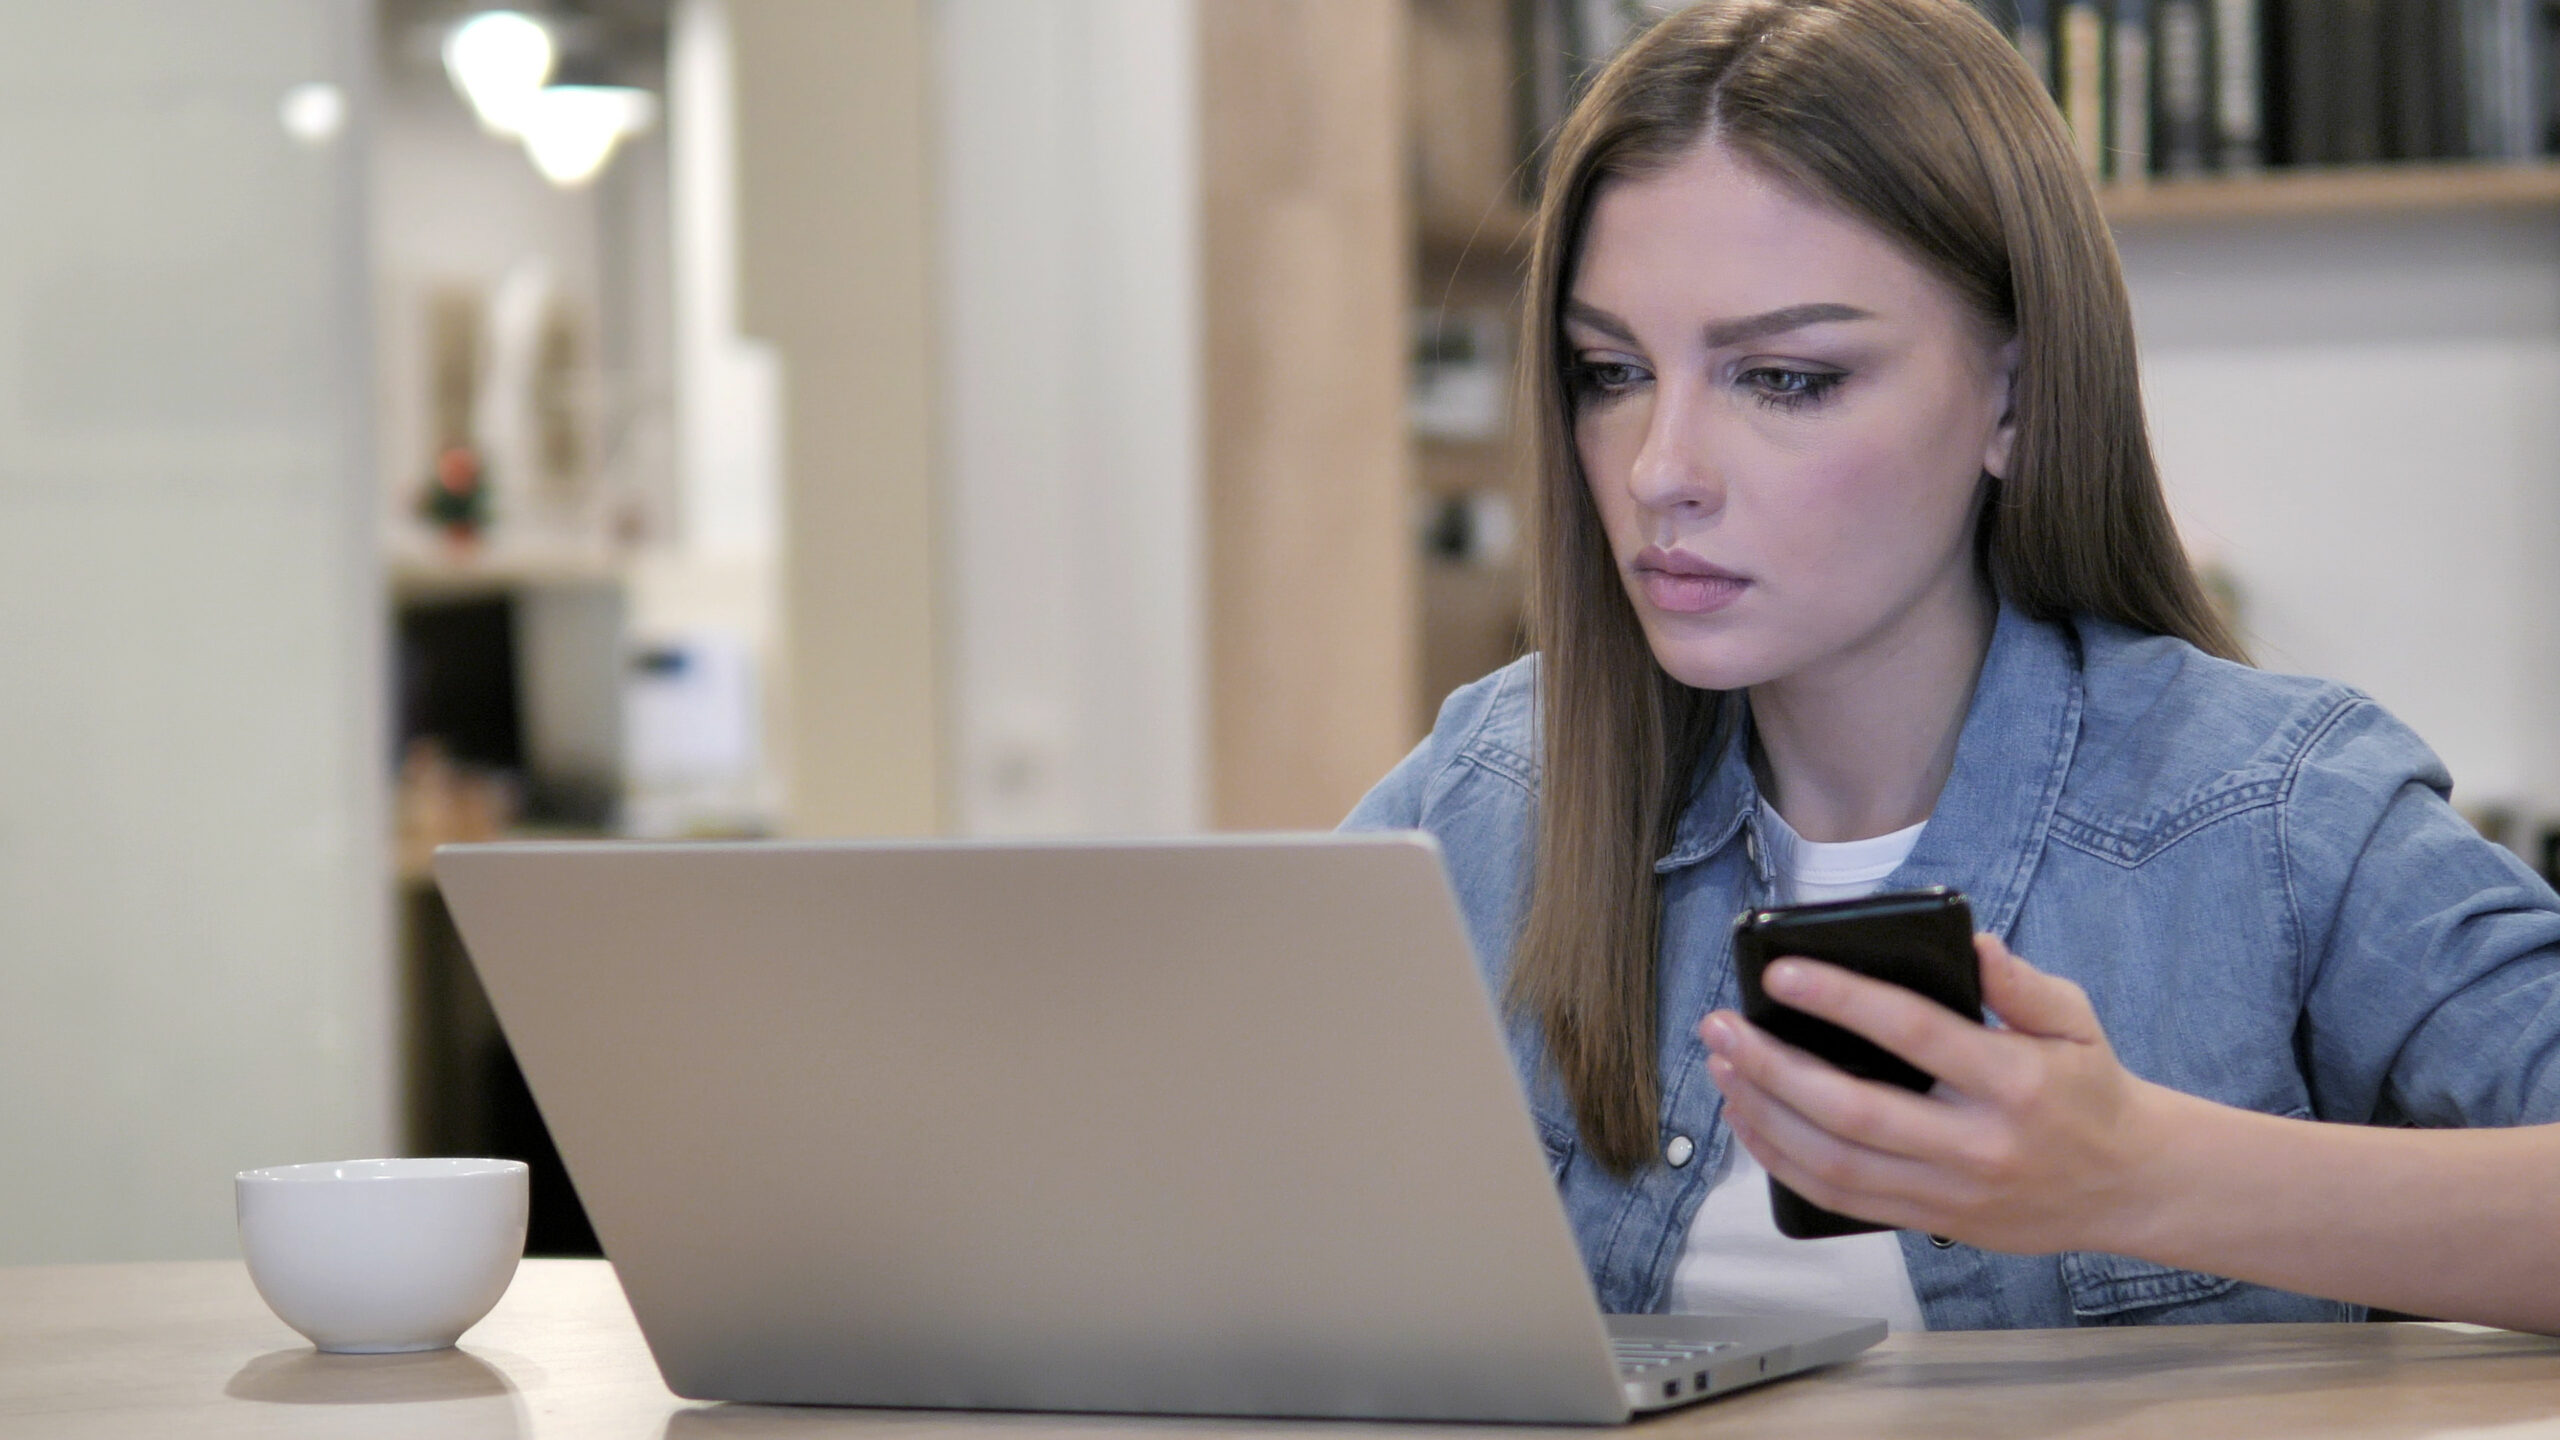 young woman with a curious look using laptop and smartphone at a desk